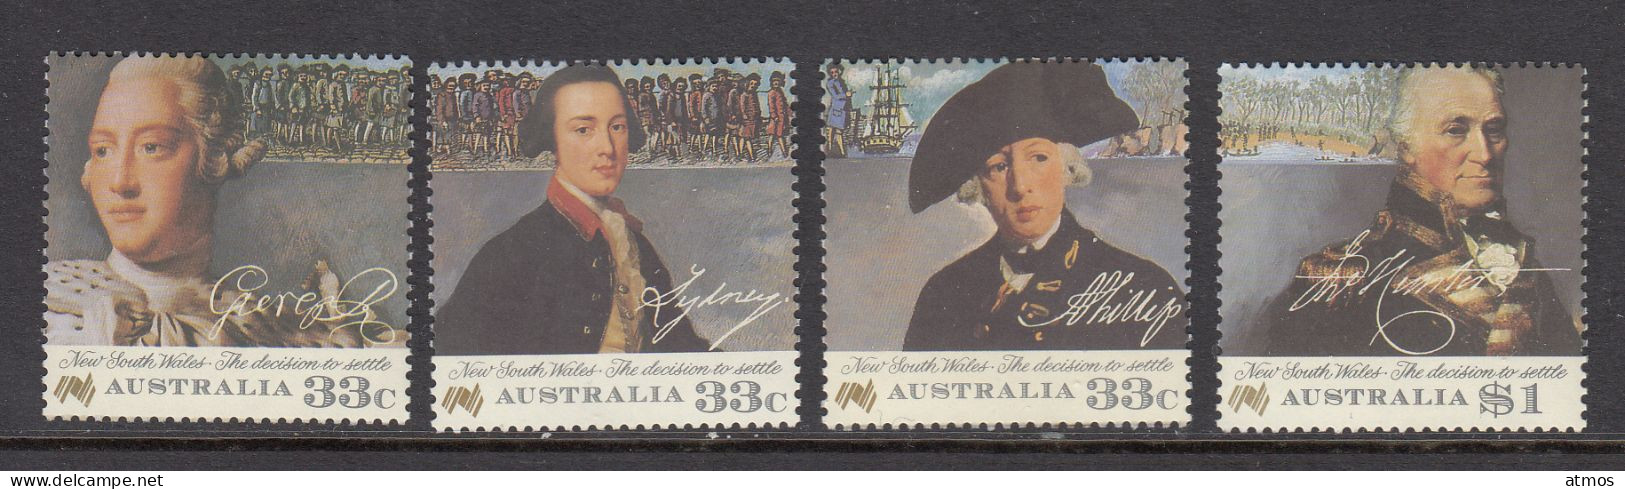 Australia MNH Michel Nr 984/87 From 1986 - Mint Stamps